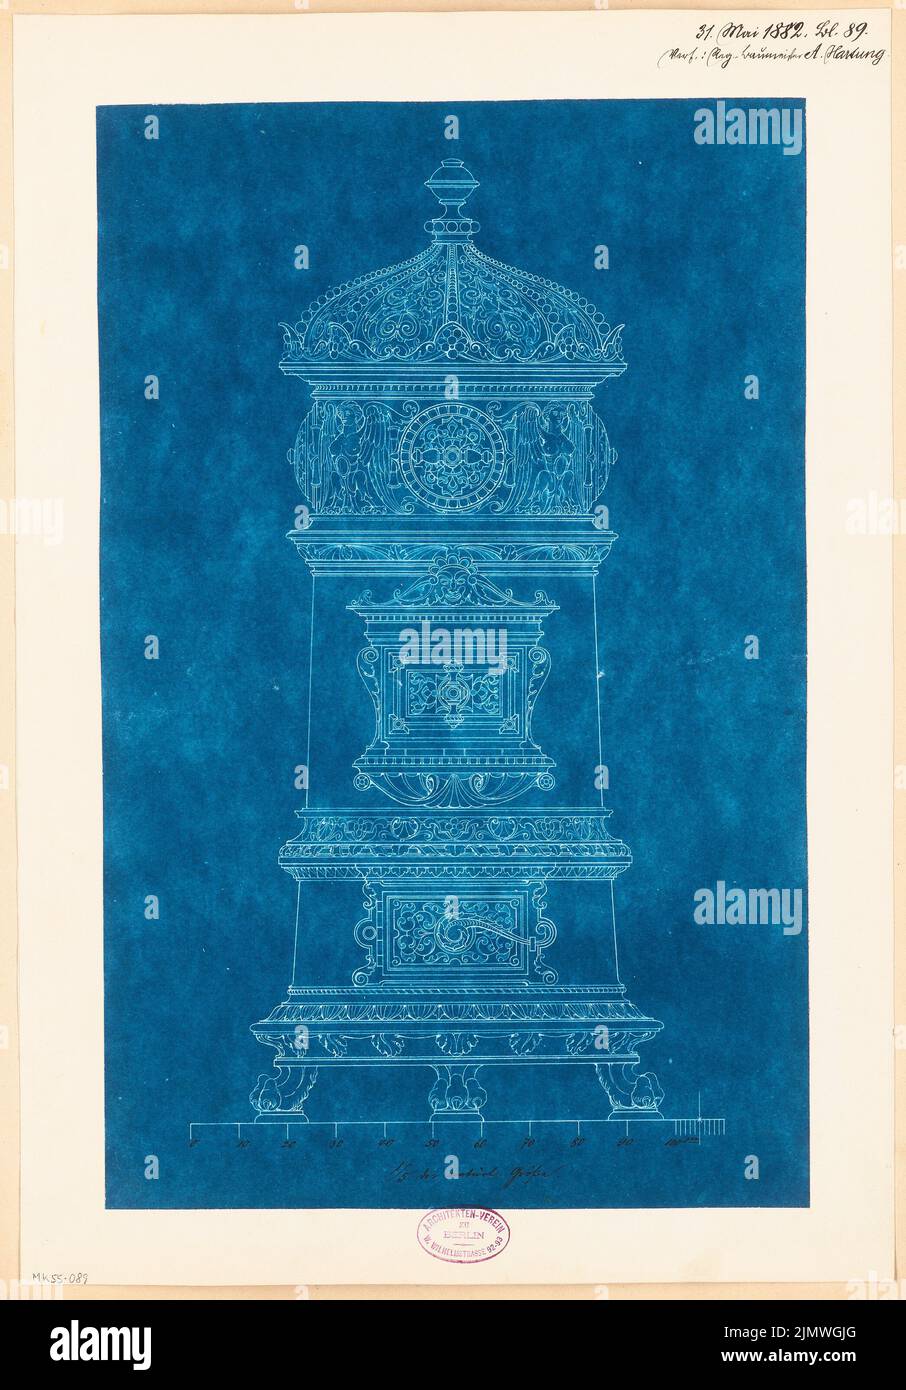 Hartung Adolf (1850-1910), stove coat made of cast iron (for a factory in Kaiserslautern). Monthly competition May 1882 (05.1882): View 1: 5. Ink over blueprint on paper, 53.4 x 37.2 cm (including scan edges) Hartung Adolf  (1850-1910): Ofenmantel aus Gusseisen (für eine Fabrik in Kaiserslautern). Monatskonkurrenz Mai 1882 Stock Photo